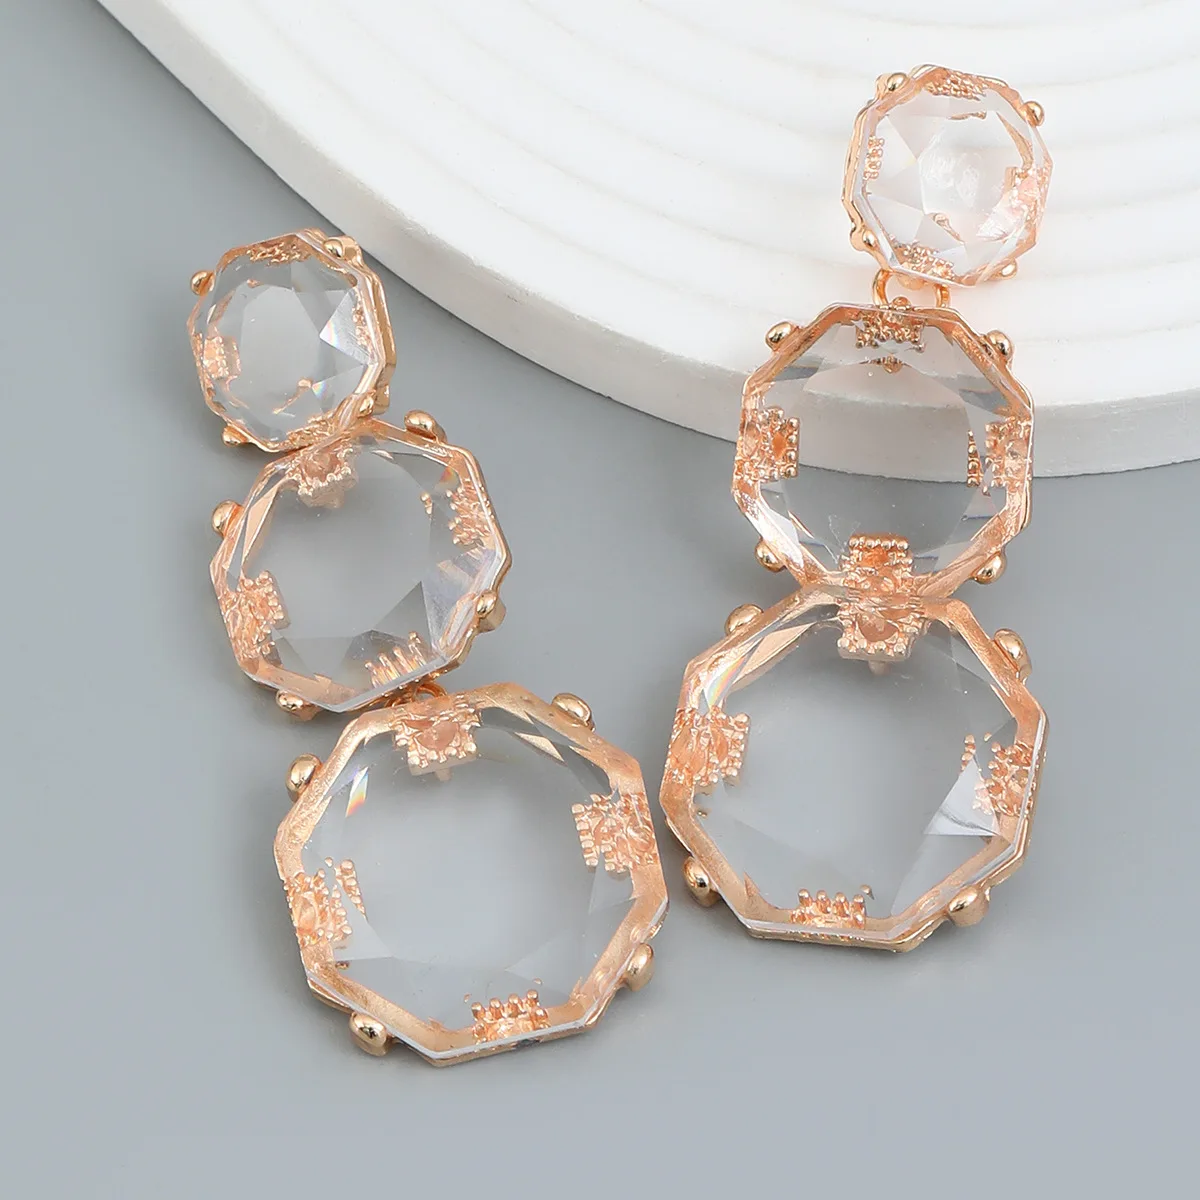 

New Gold Geometric Acrylic Resin Drop Earrings for Women Statement Round Square Dangle Brincos Jewelry